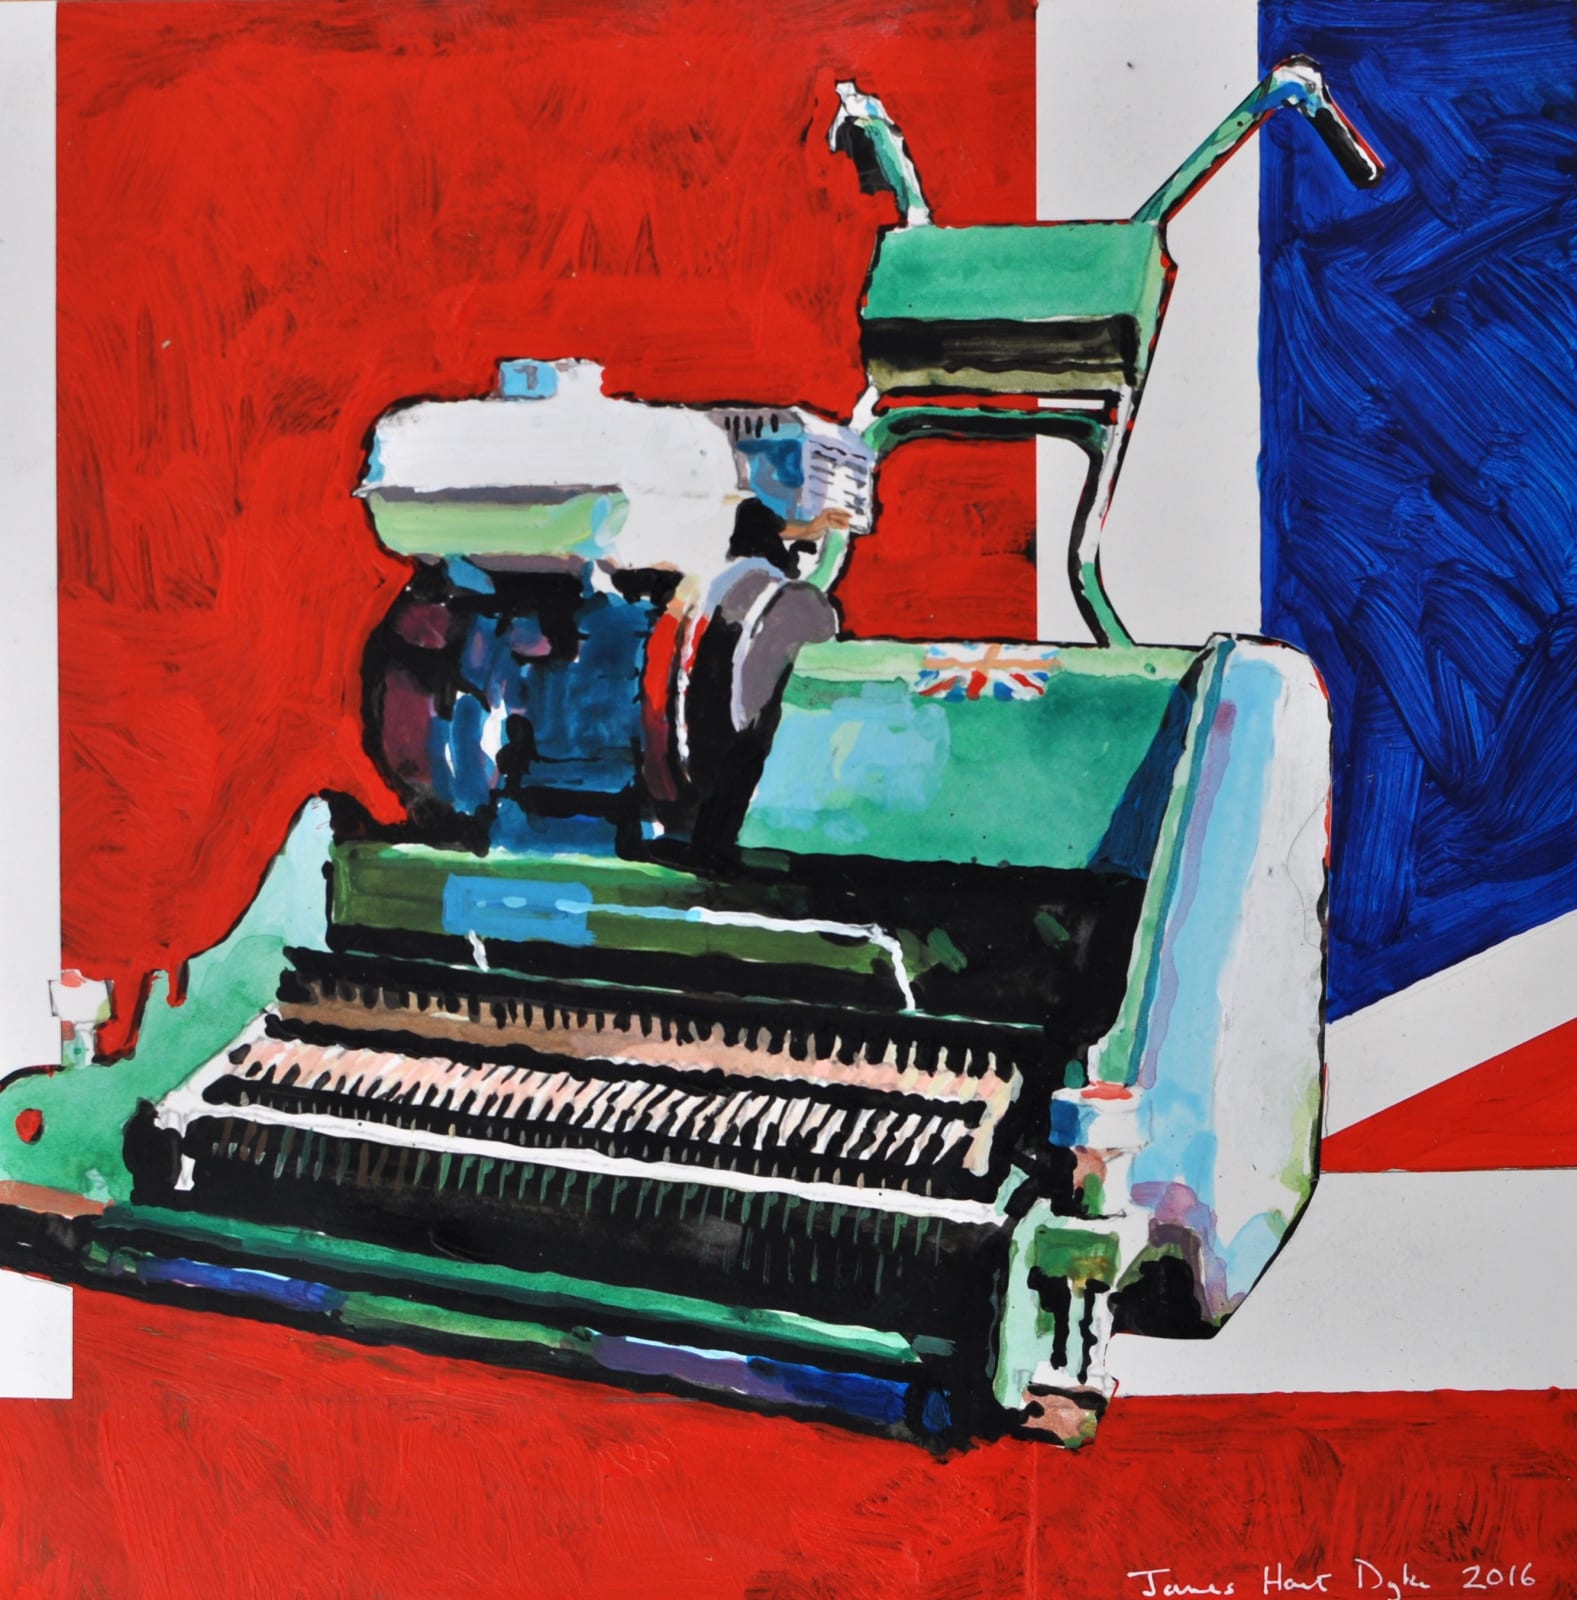 Lawn Mover, Union Jack, Queen's Tennis Club, 2016